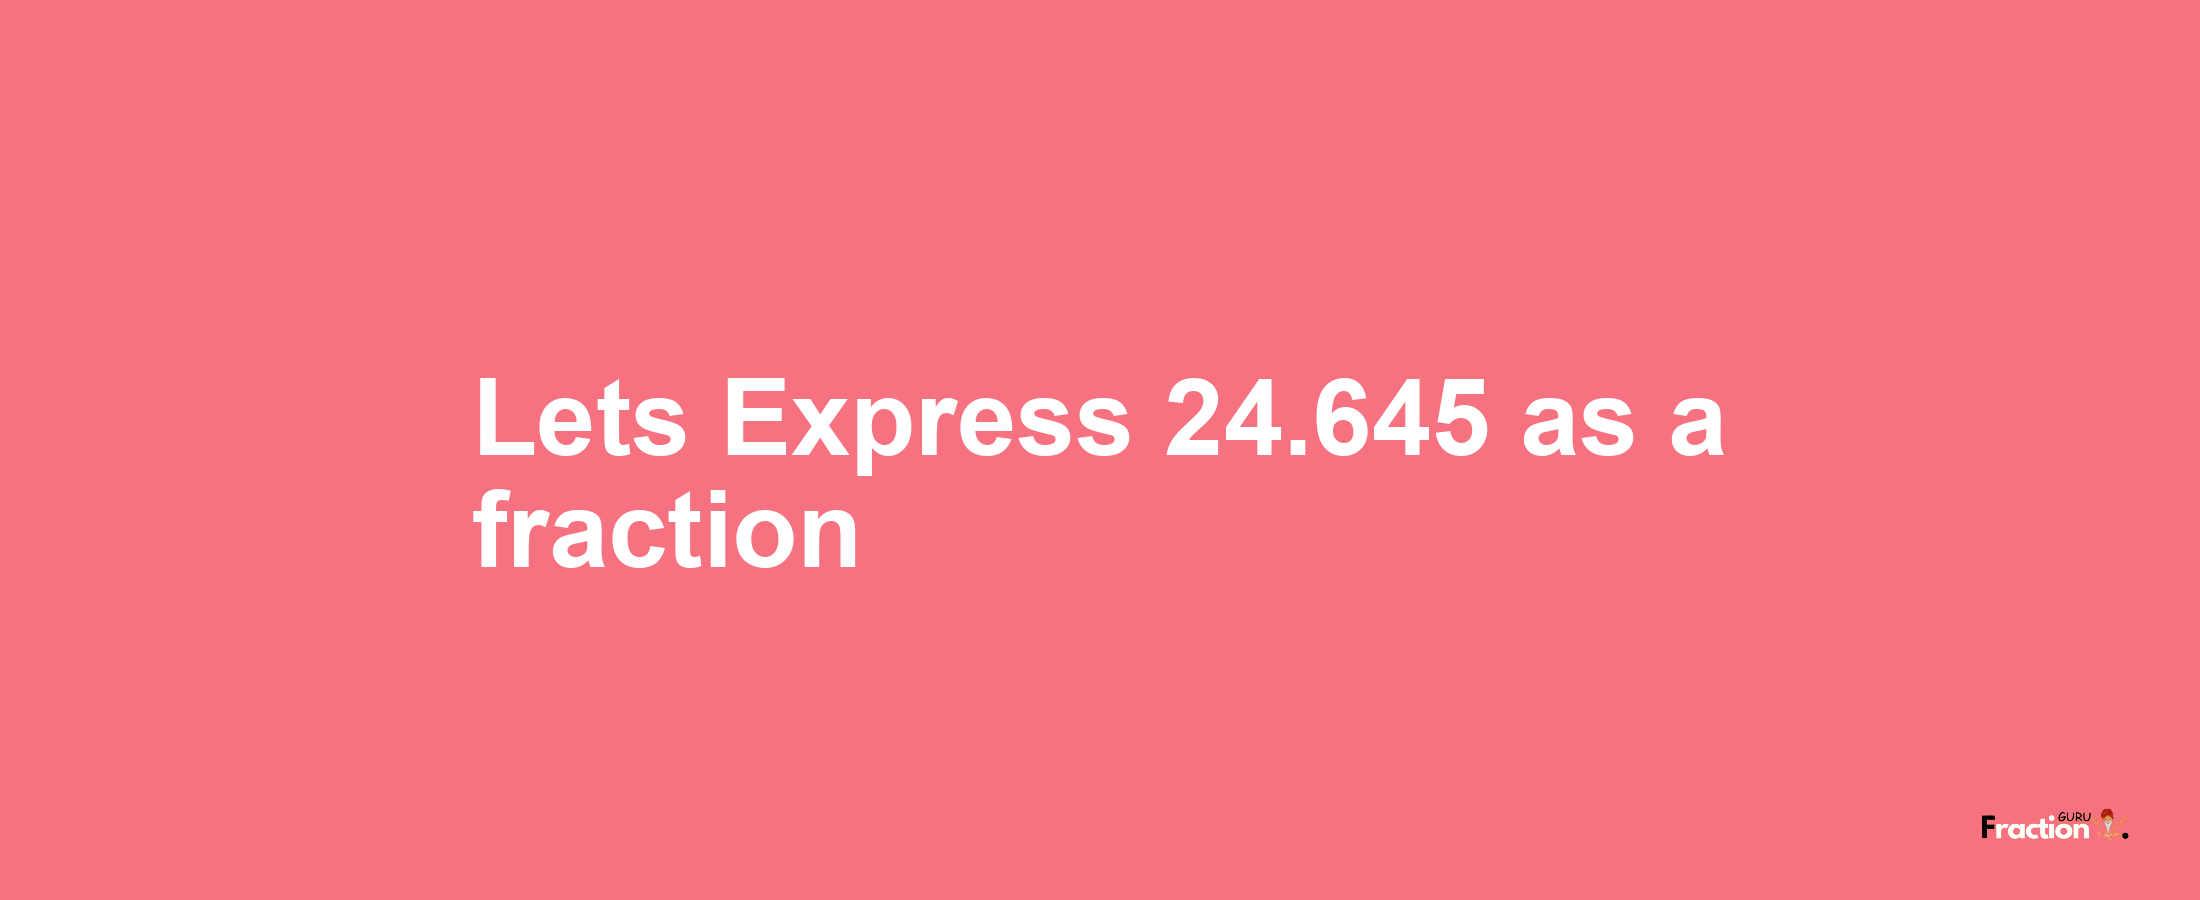 Lets Express 24.645 as afraction